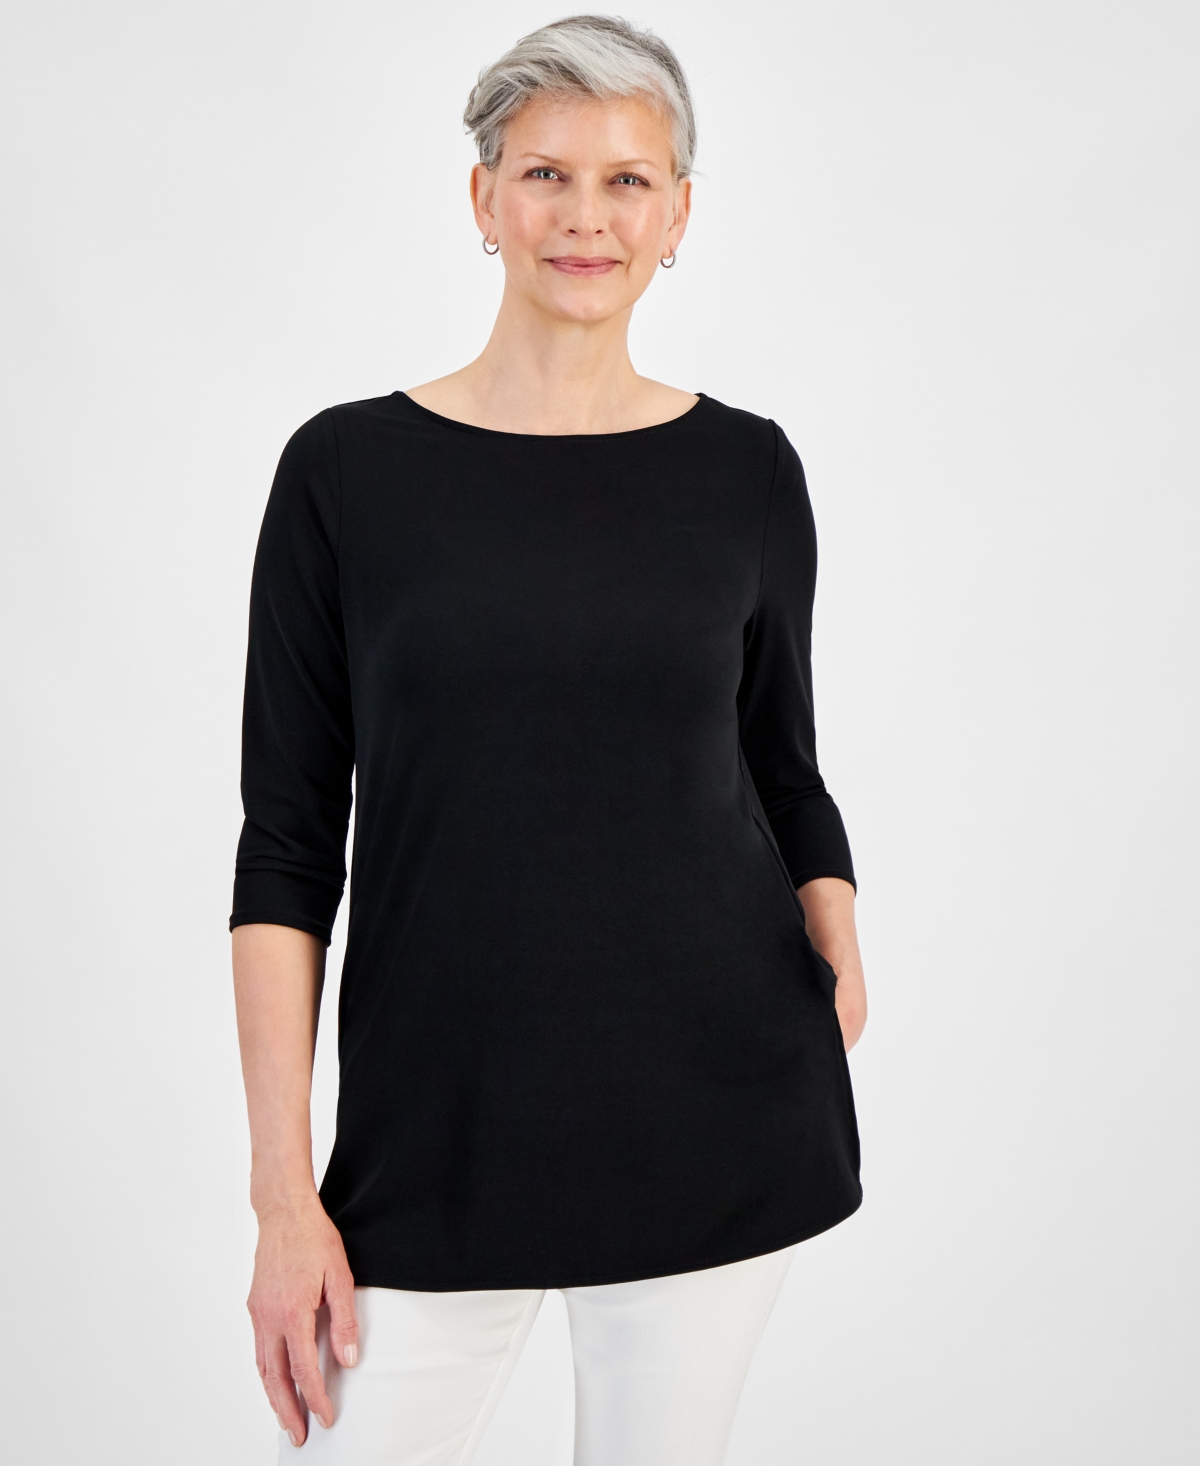 Women's Boat-Neck 3/4-Sleeve Top, Created for Macy's - Deep Black